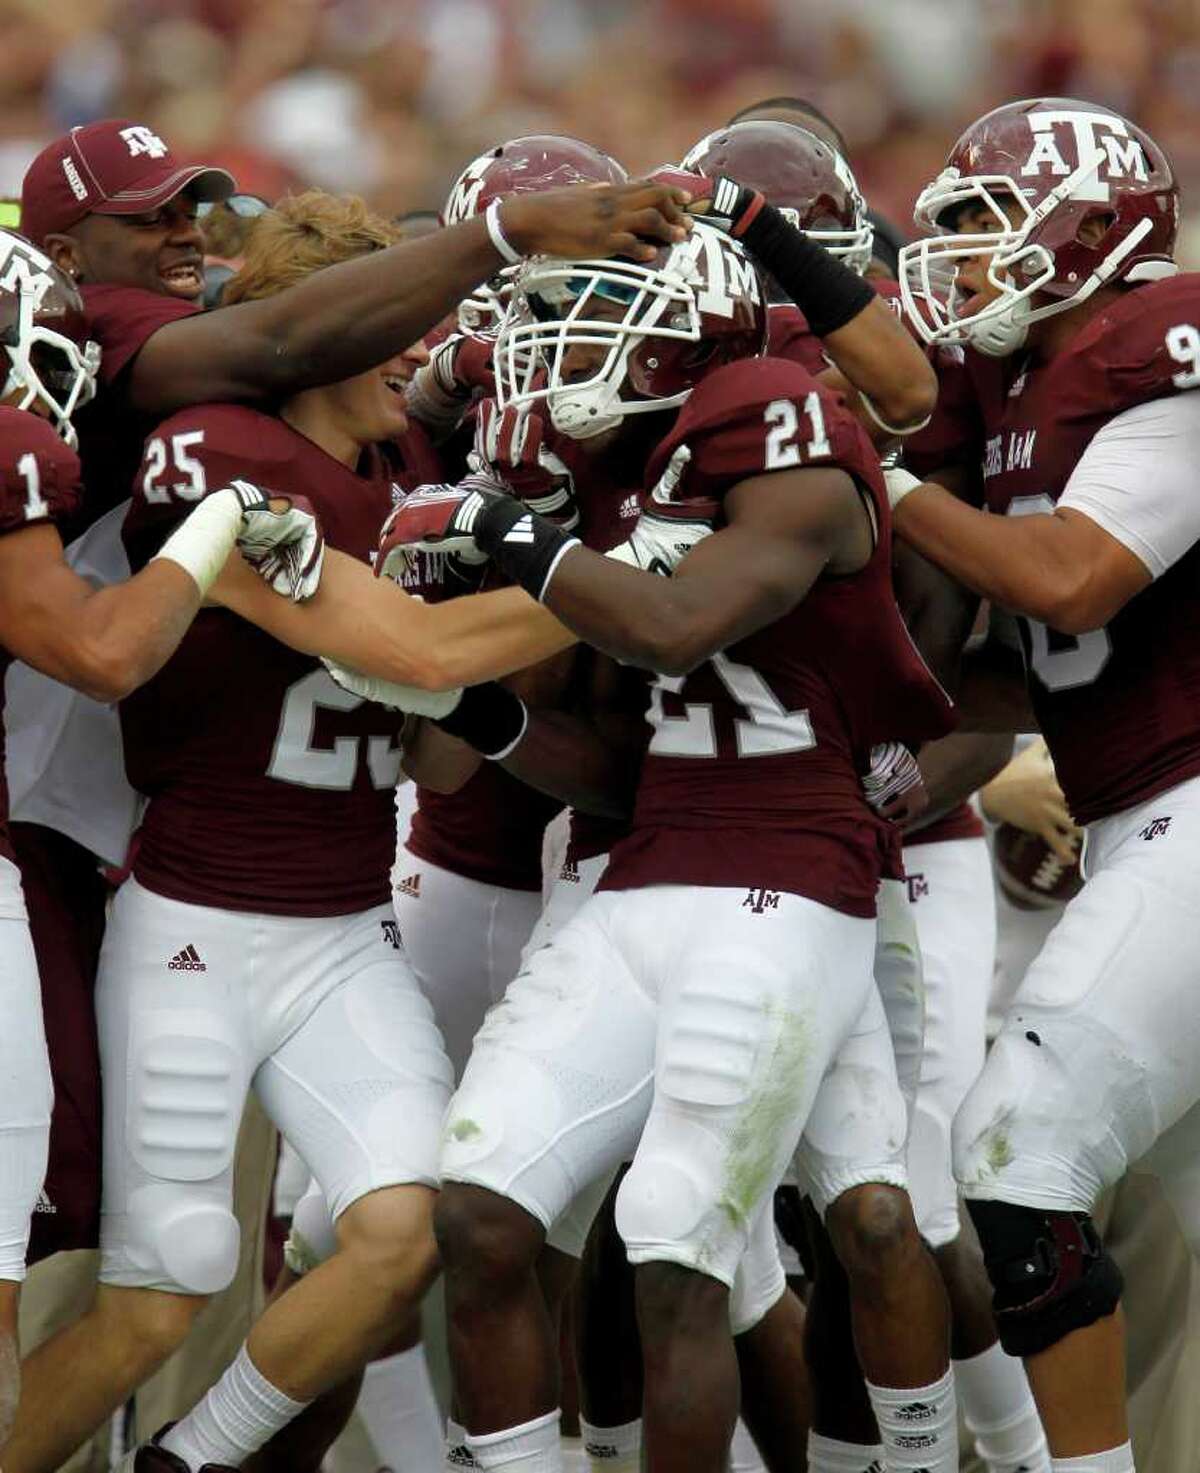 Texas A&M players mob Texas A&M Aggies defensive back Steven Terrell (21) after his interception in the second quarter of the college football game at Texas A&M, Nov. 19, 2011. Texas A&M was leading Kansas 44-0 at the half.